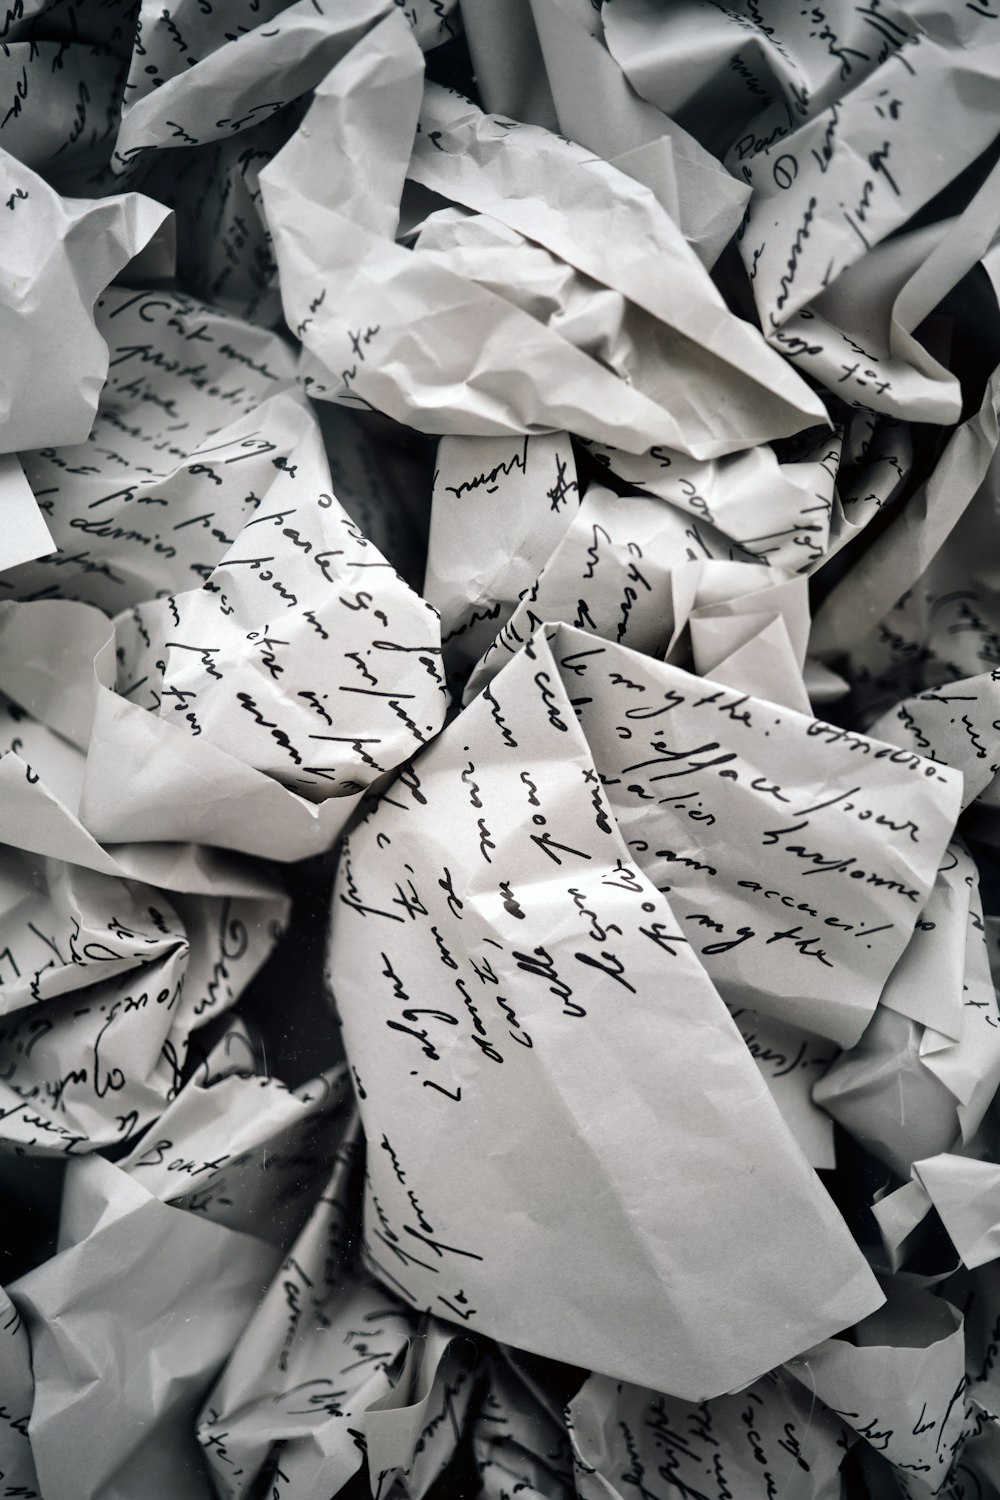 a pile of paper with writing on it